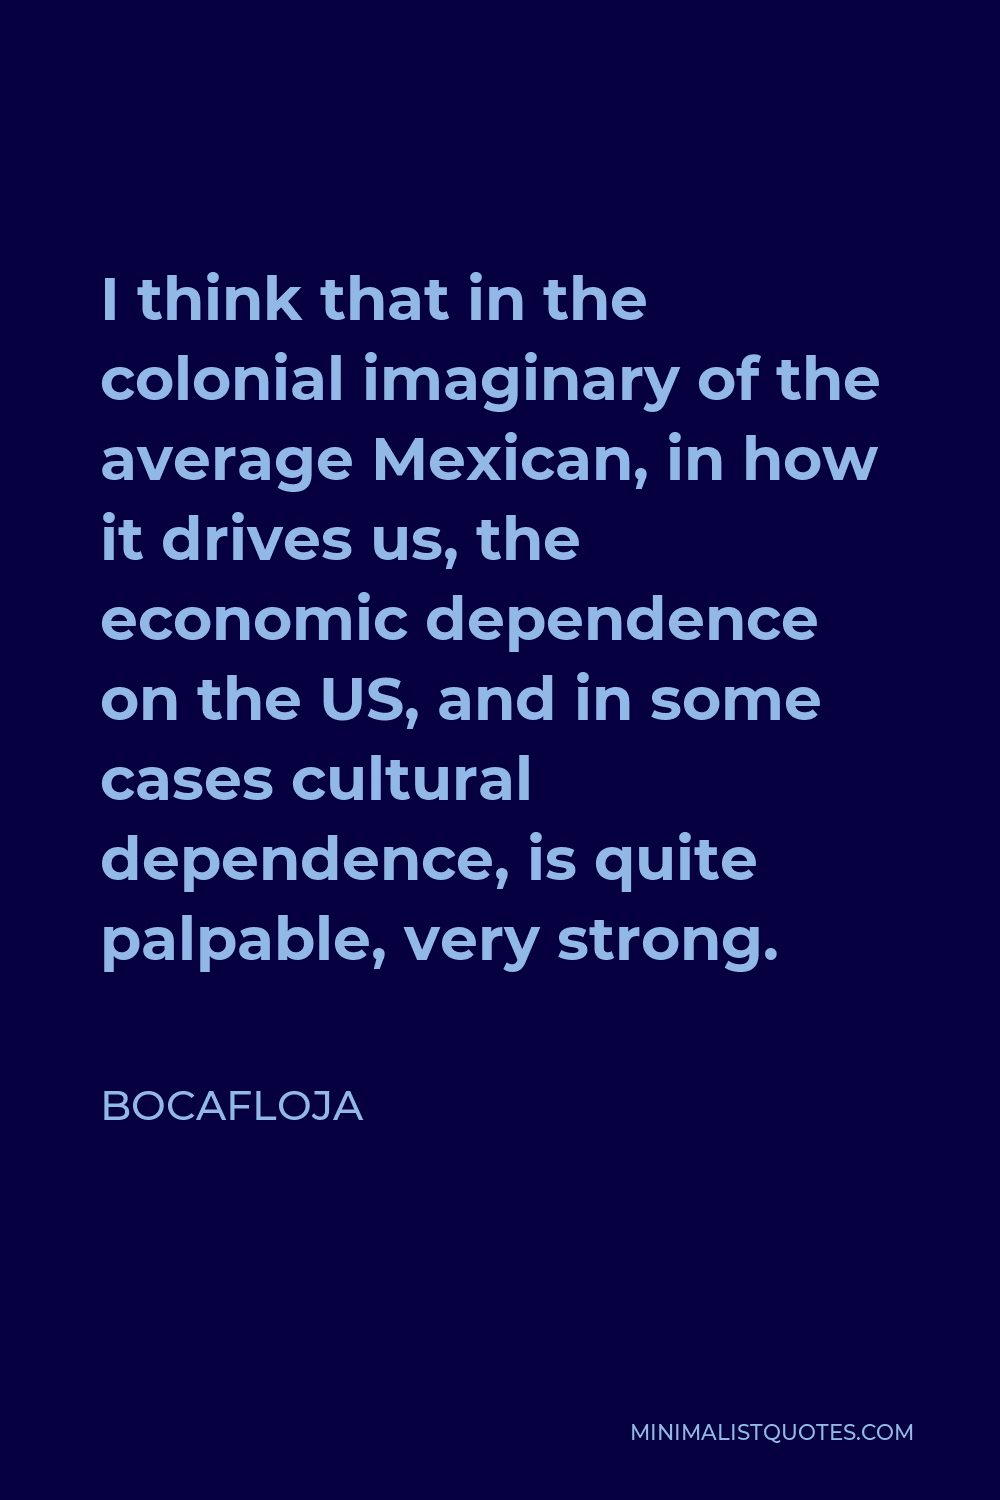 Bocafloja Quote - I think that in the colonial imaginary of the average Mexican, in how it drives us, the economic dependence on the US, and in some cases cultural dependence, is quite palpable, very strong.